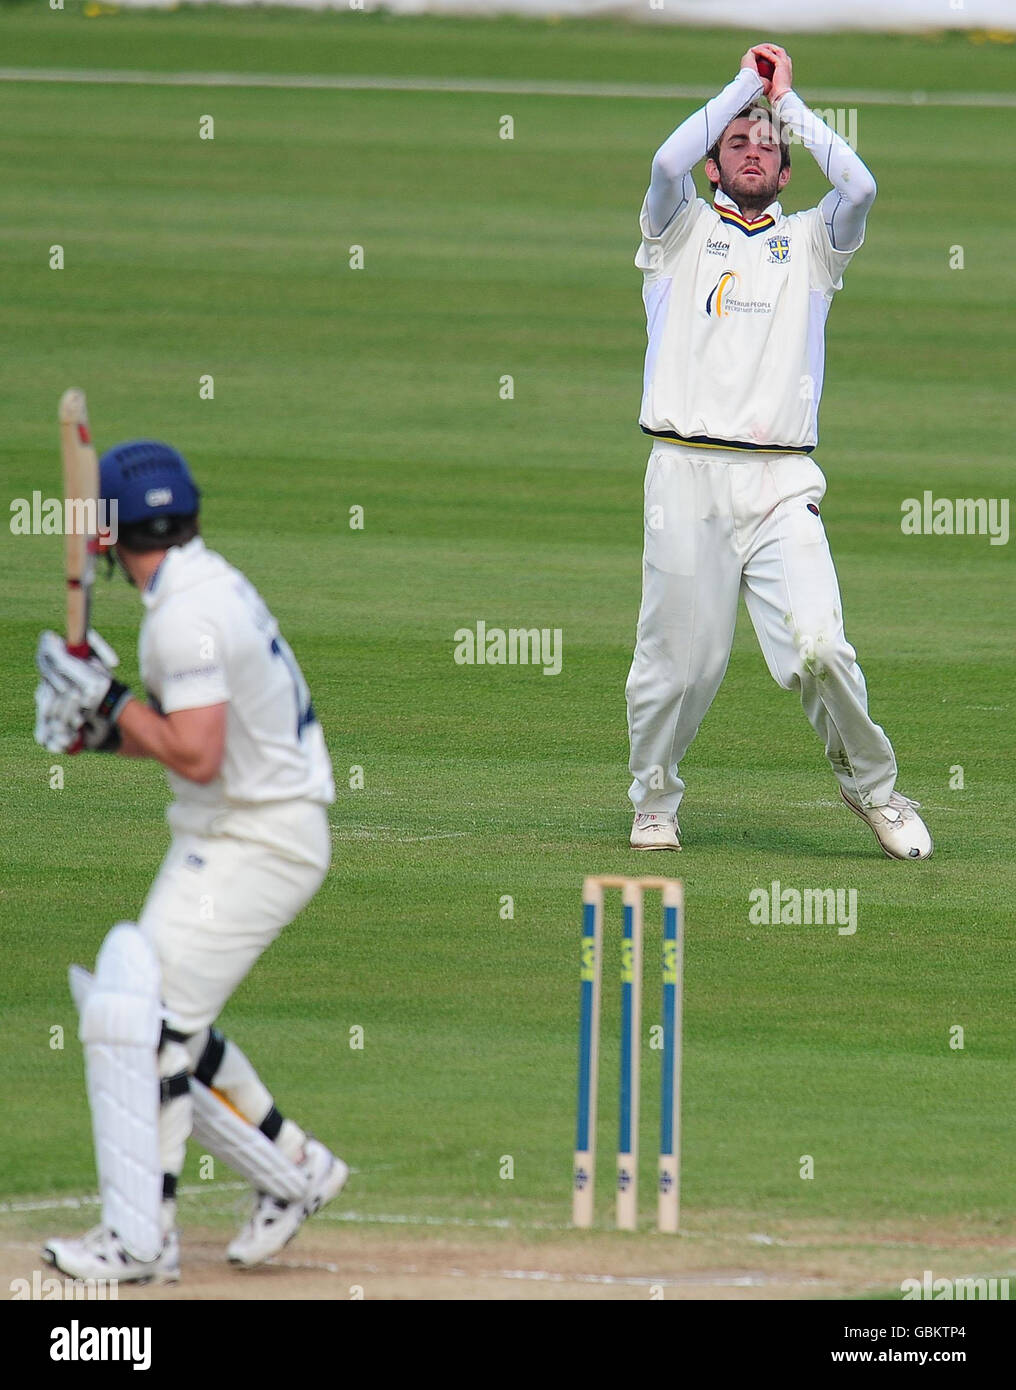 Yorkshire's Joe Sayers is caught by Durham's Liam Plunkett (right) during the Liverpool Victoria County Championship match at Chester le Street, Durham. Stock Photo